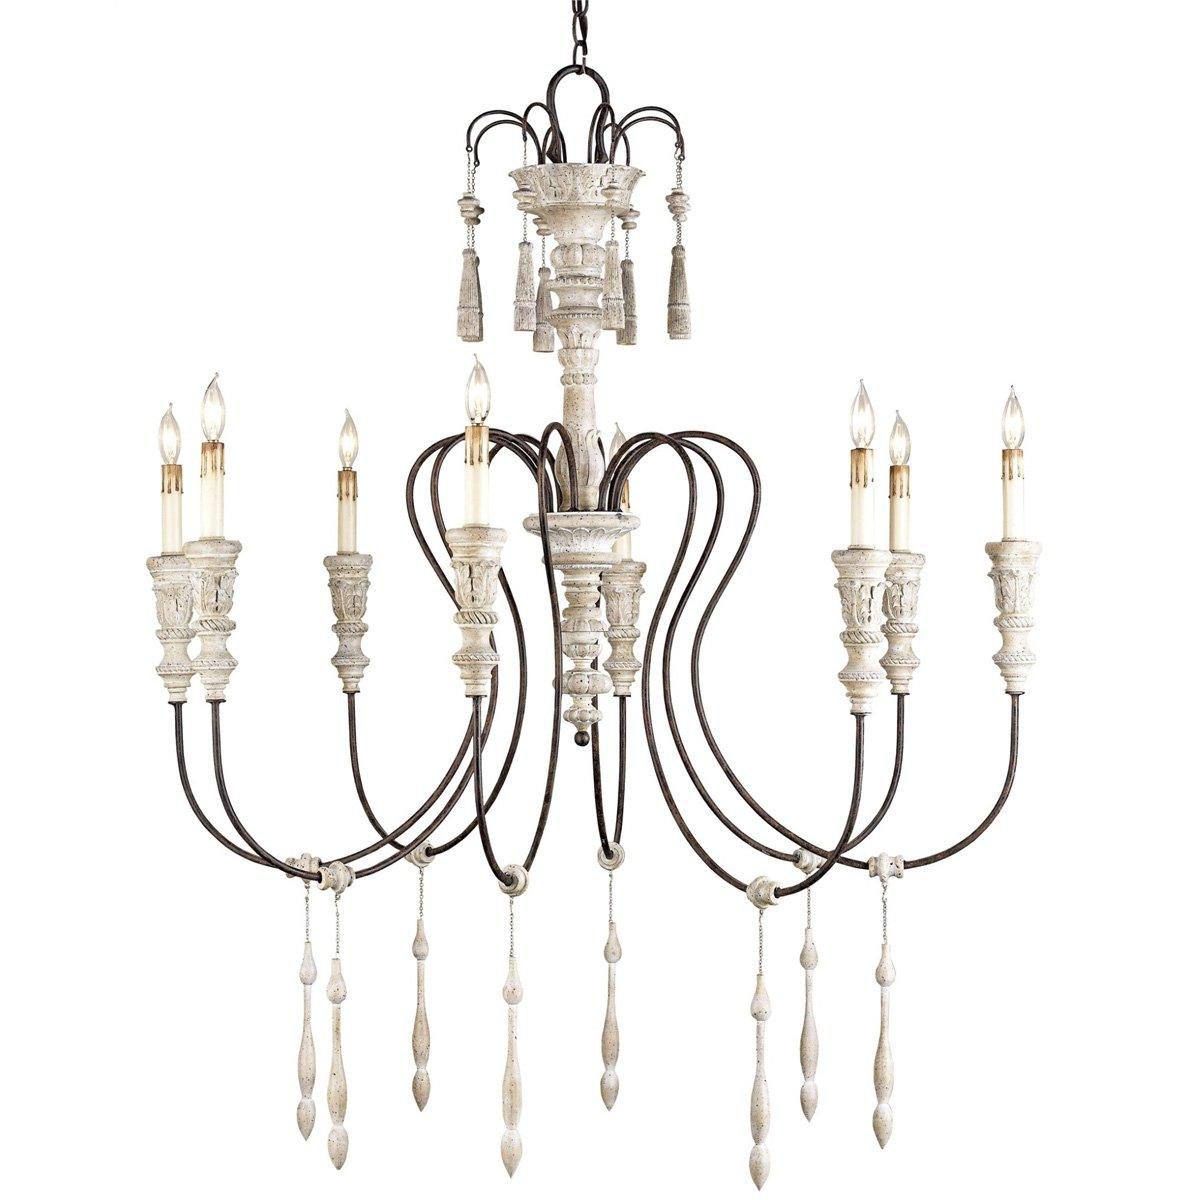 Shabby Chic and Iron Chandelier - Belle Escape